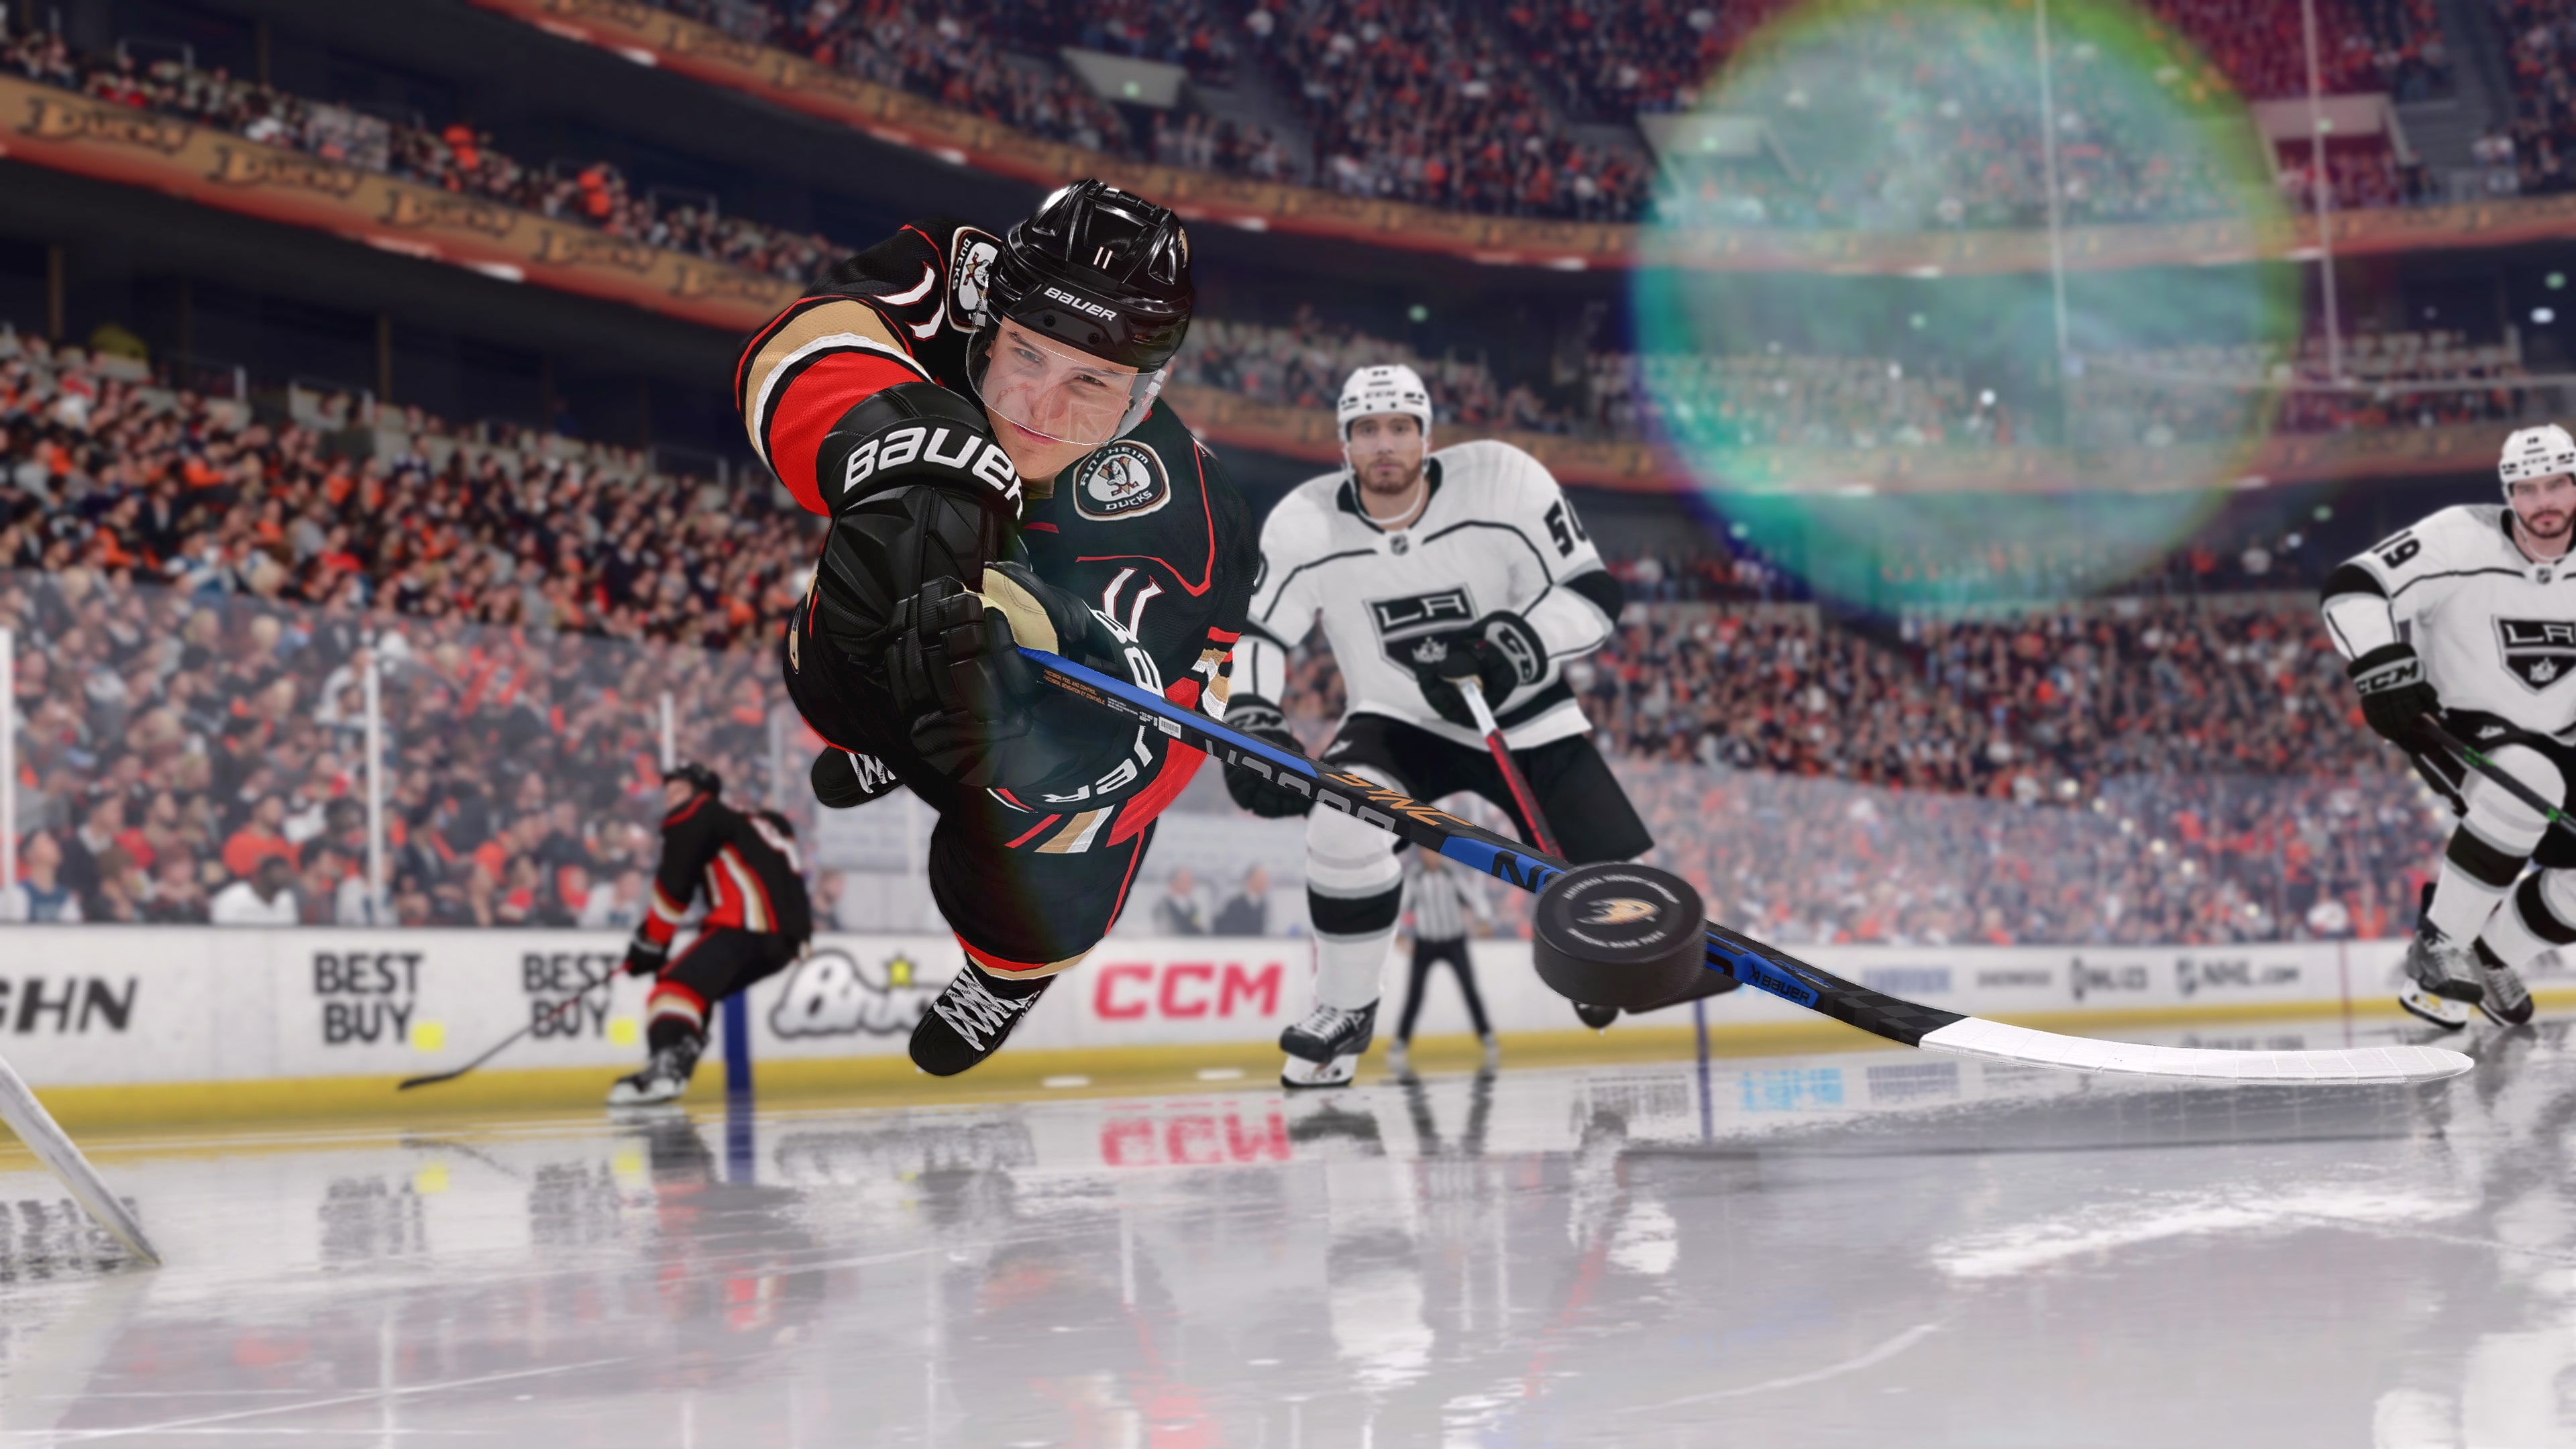 Buy NHL 23 on PS4™ and PS5™ - EA SPORTS